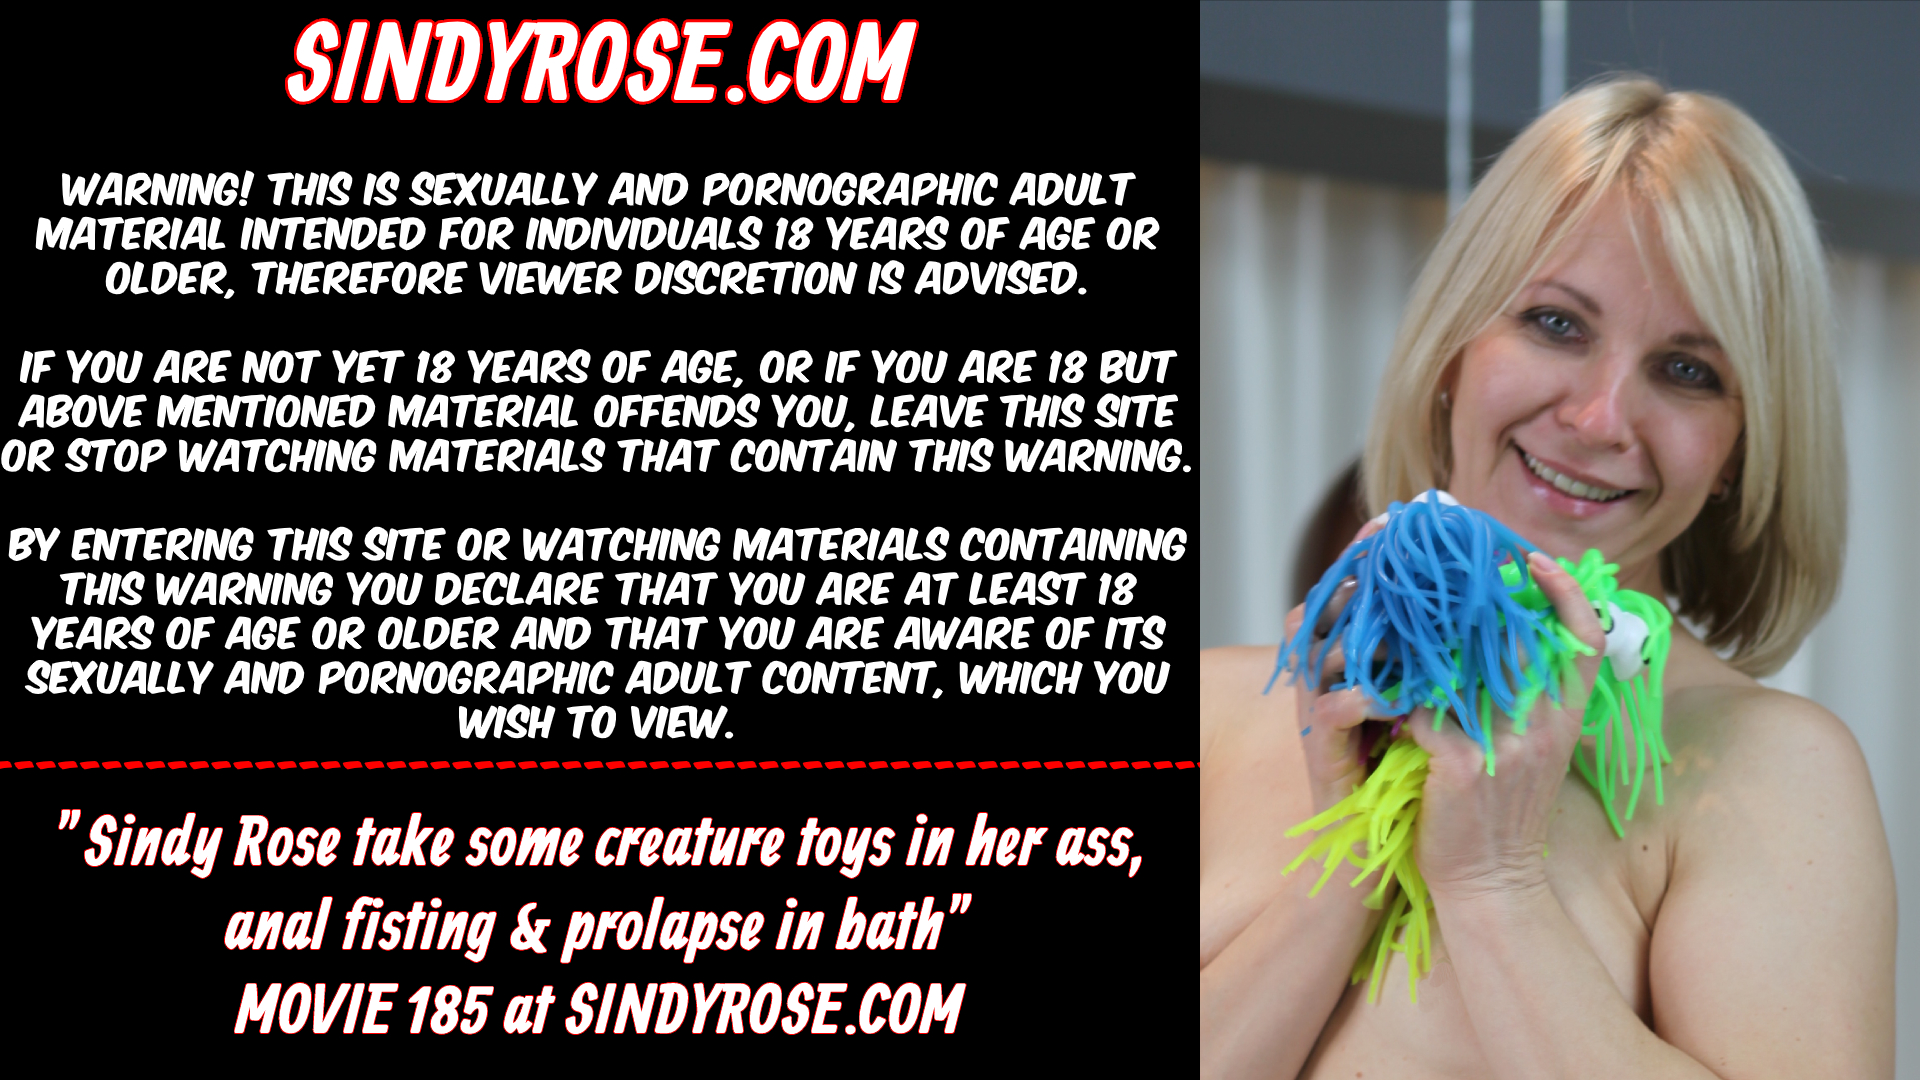 Sindy Rose creature toys in ass, anal fisting, prolapse